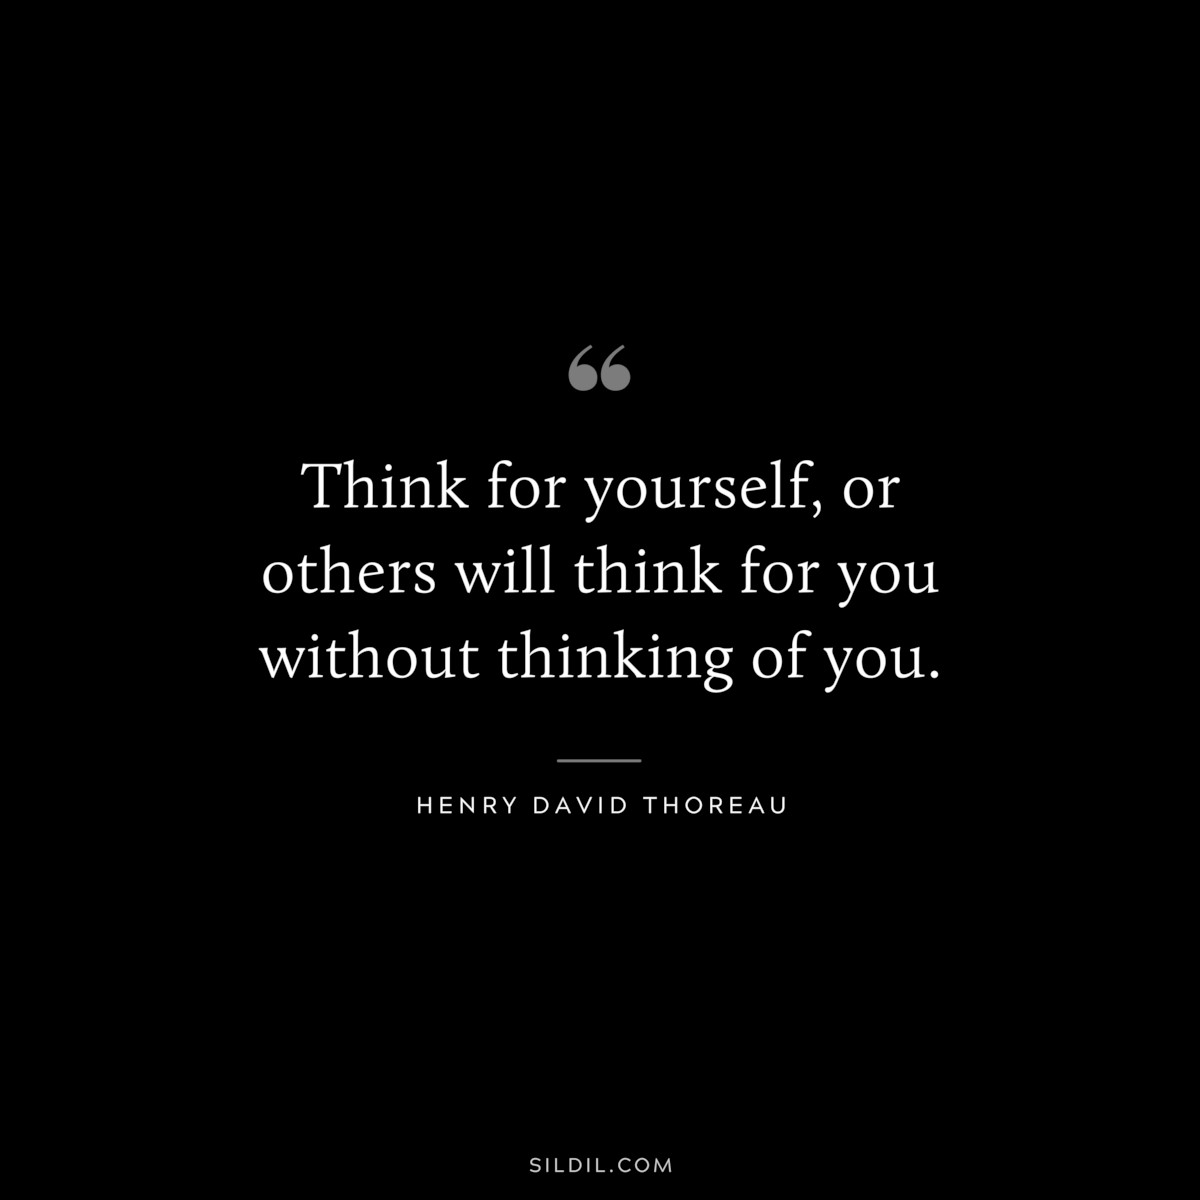 Think for yourself, or others will think for you without thinking of you. — Henry David Thoreau